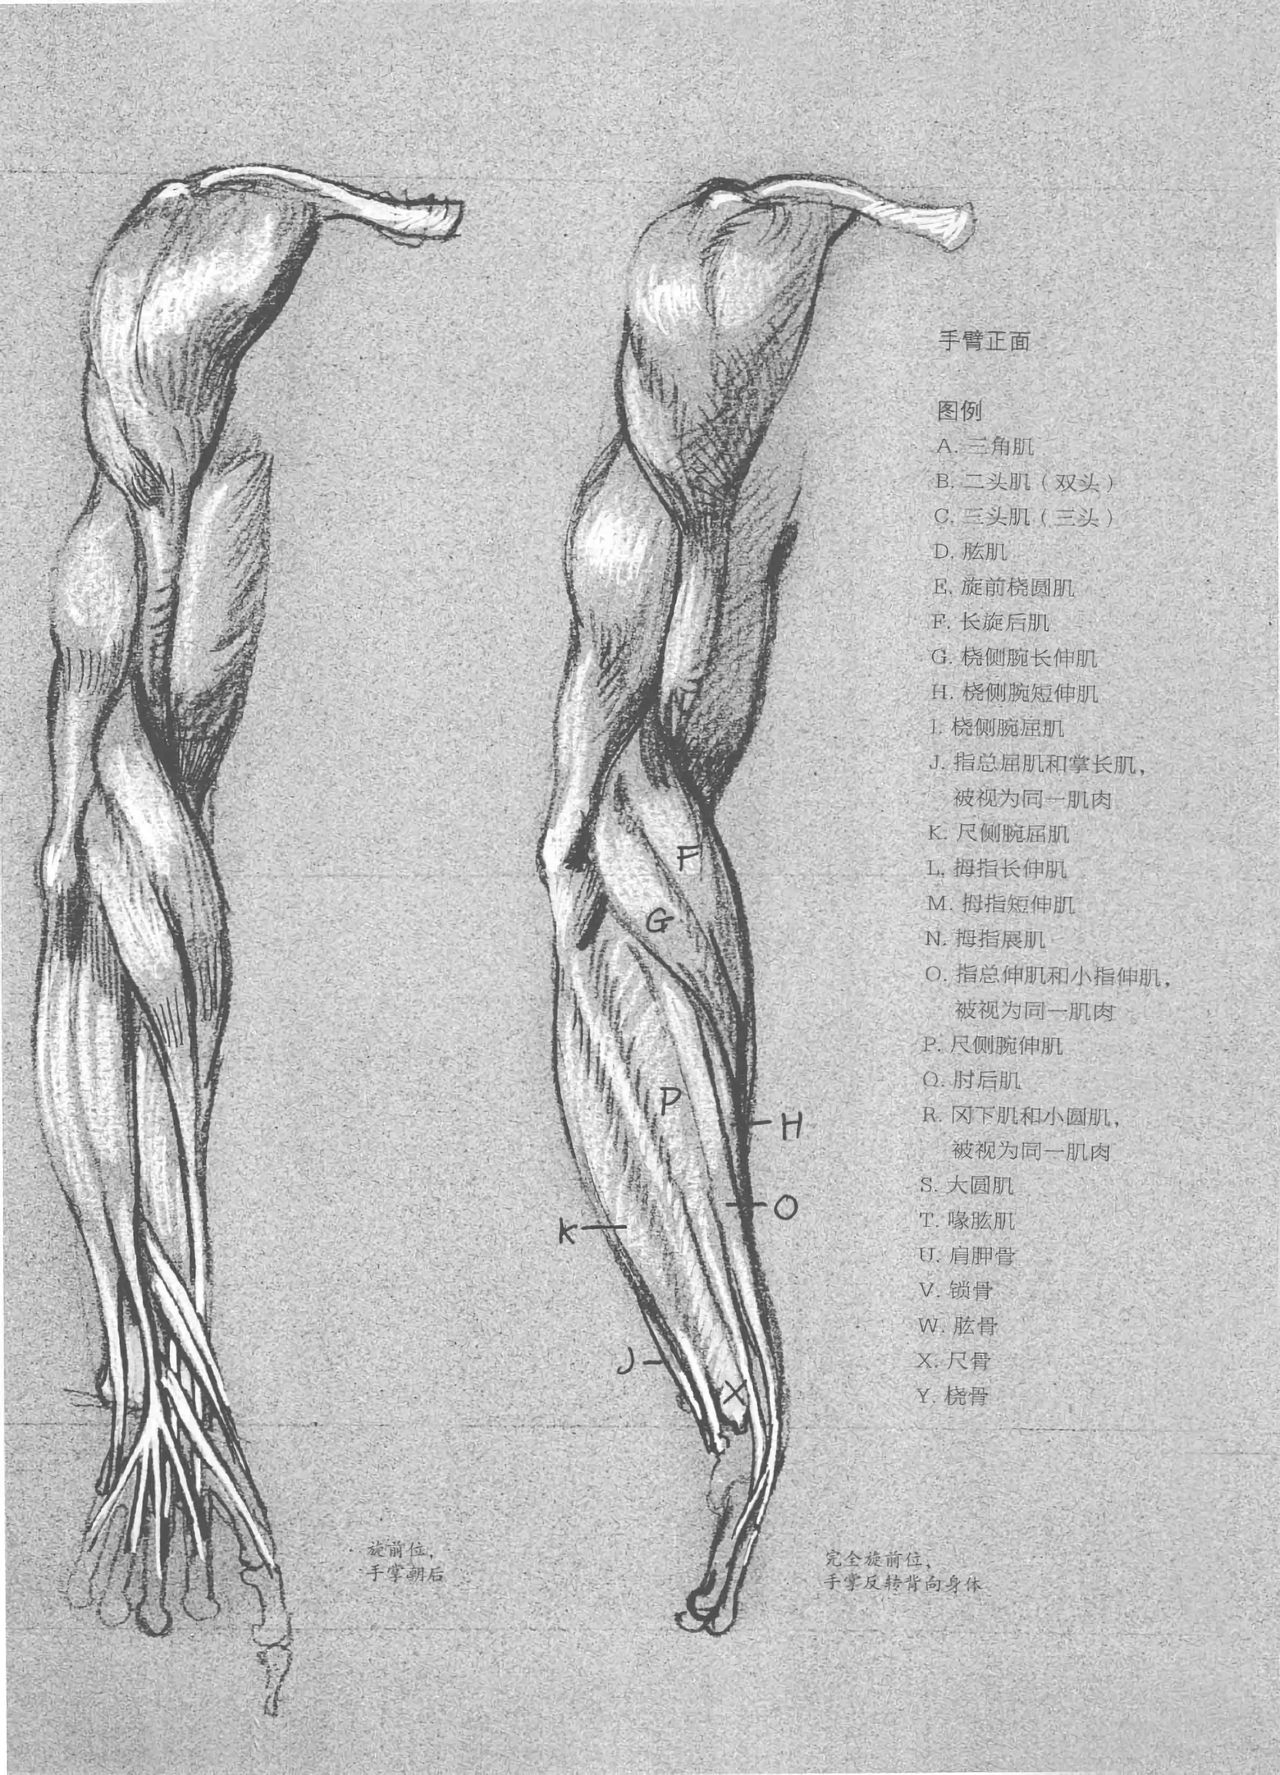 Anatomy-A Complete Guide for Artists - Joseph Sheppard [Chinese] 55